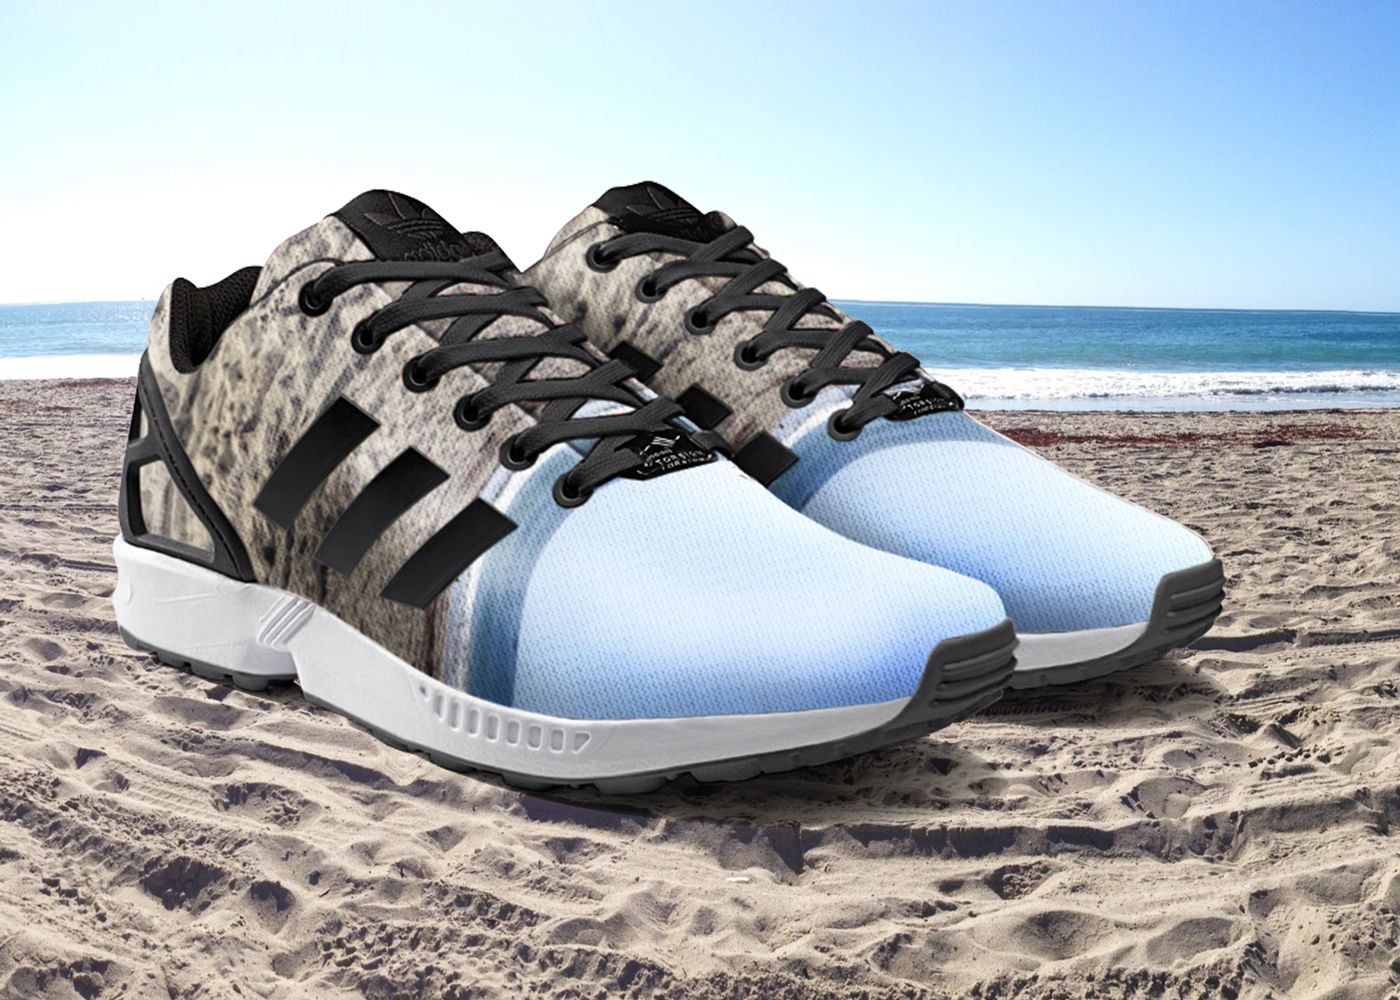 App lets Adidas sneakers with Instagram photos | Business